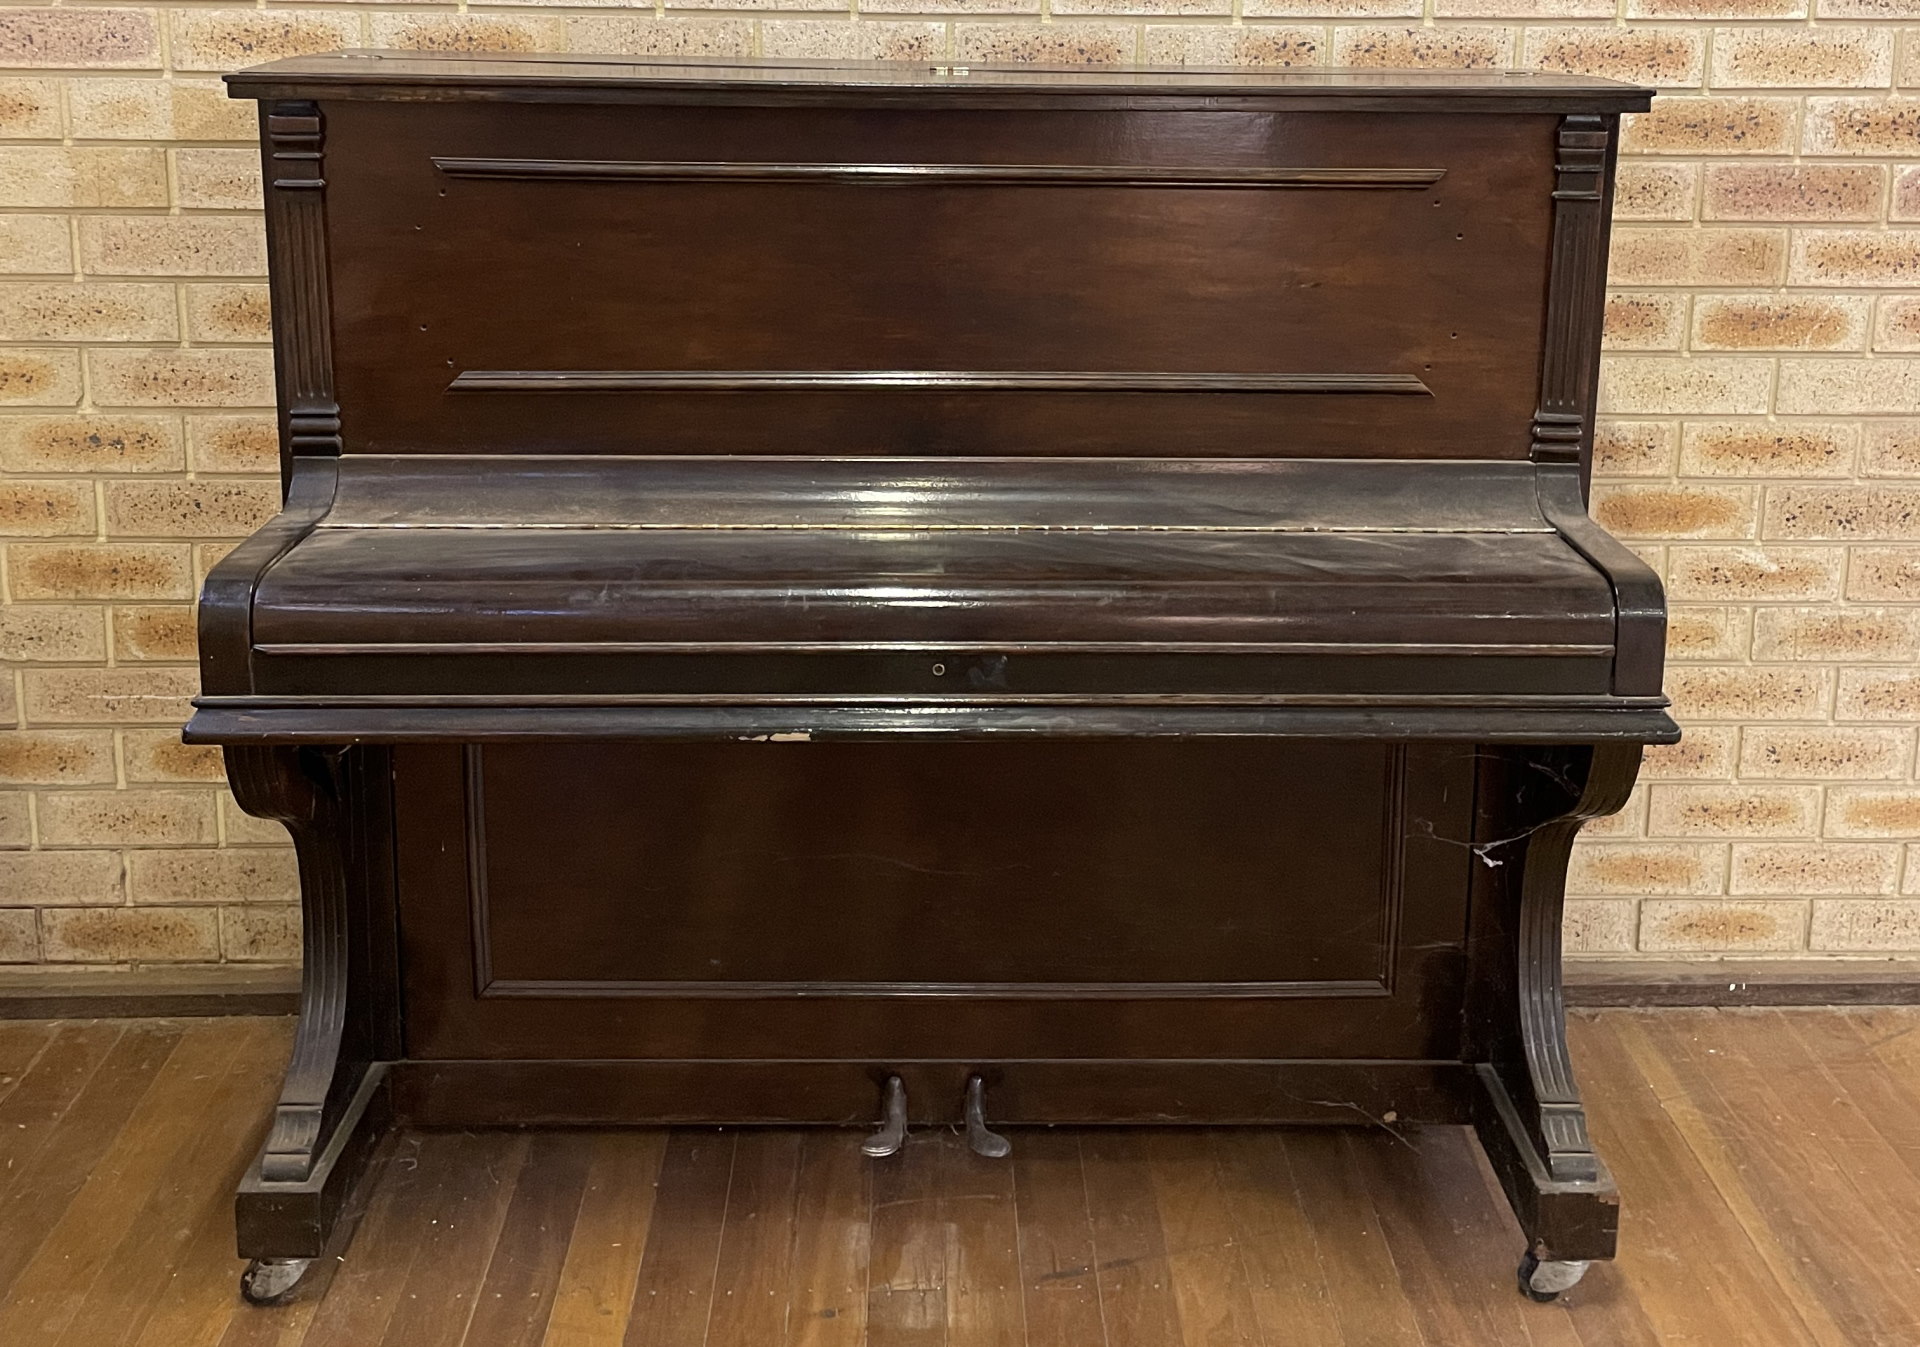 Cookernup-Hall-Piano.jpg